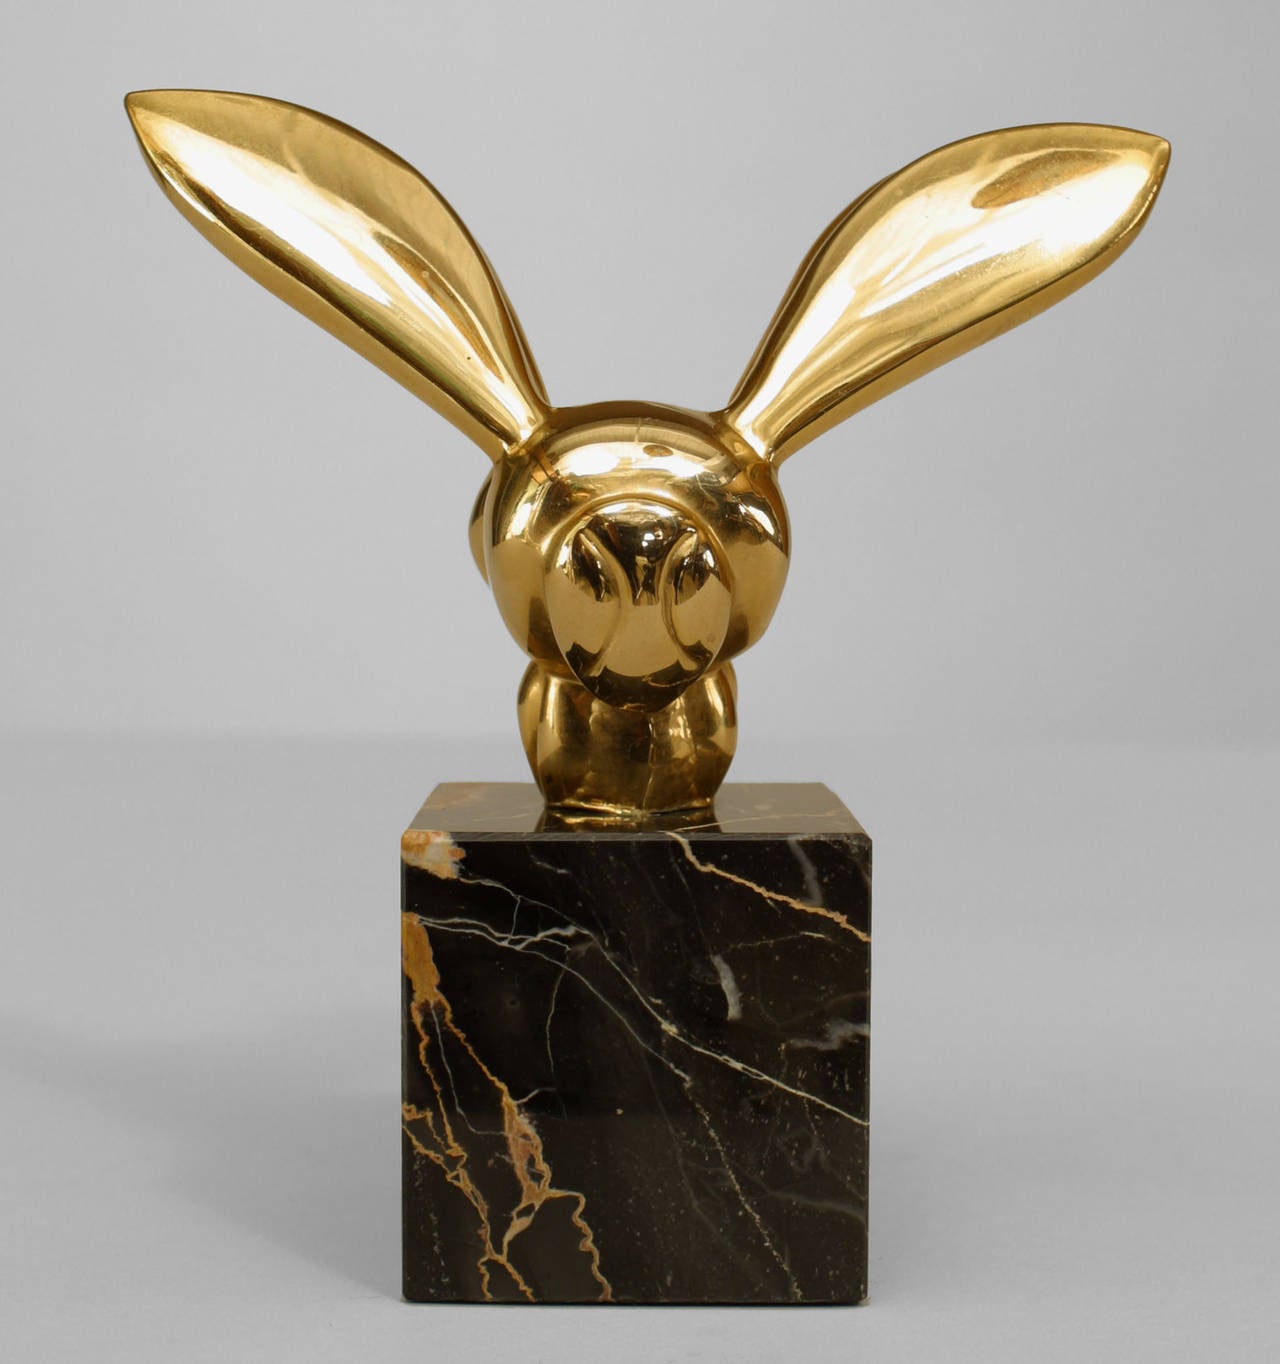 American Mid-Century Modern brass sculpture of a bee mounted on a square
black marble base after G. Lachaise by Alva Museum Reproductions.